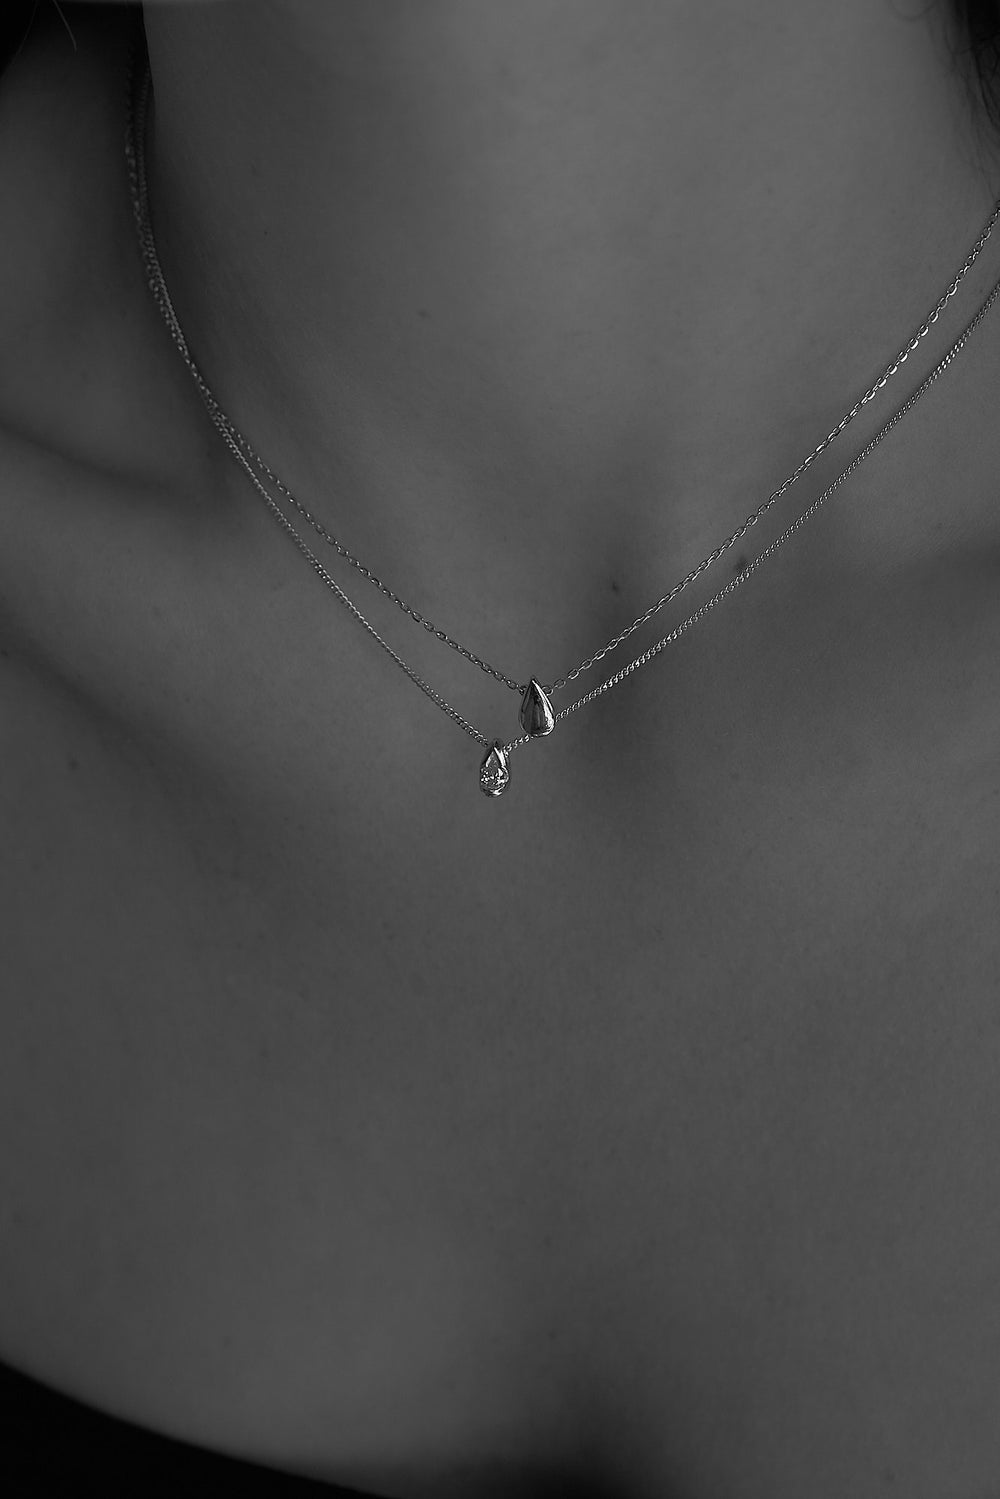 Pear Necklace | Silver or 9K White Gold, More Options Available| Natasha Schweitzer